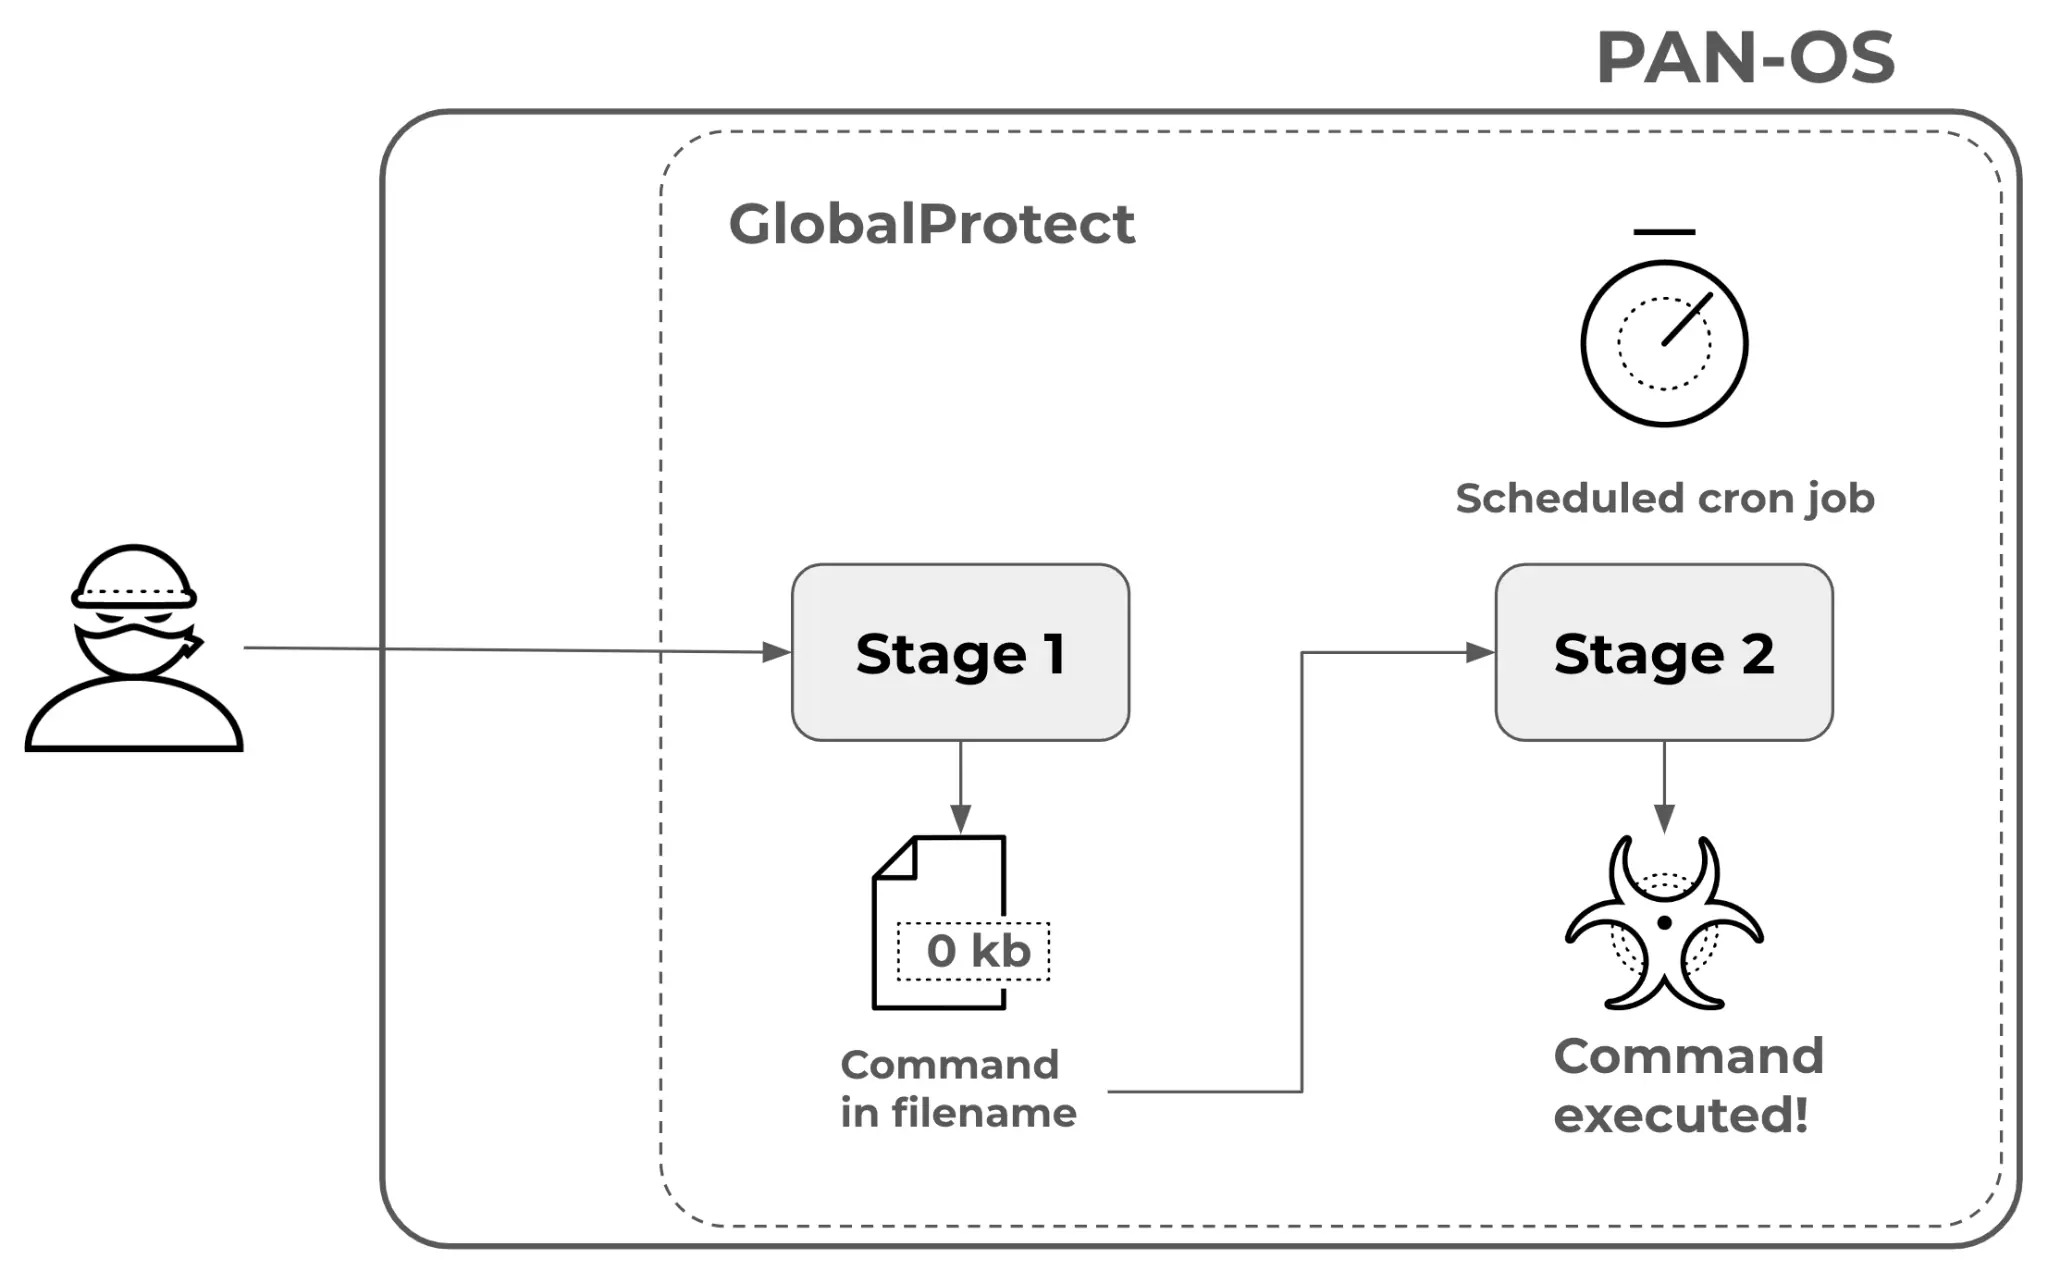 An infographic showing a cyber attack on PAN-OS GlobalProtect, starting with Stage 1 involving a 0 kb file with a command in the filename, leading to Stage 2 where the command is executed by a scheduled cron job.